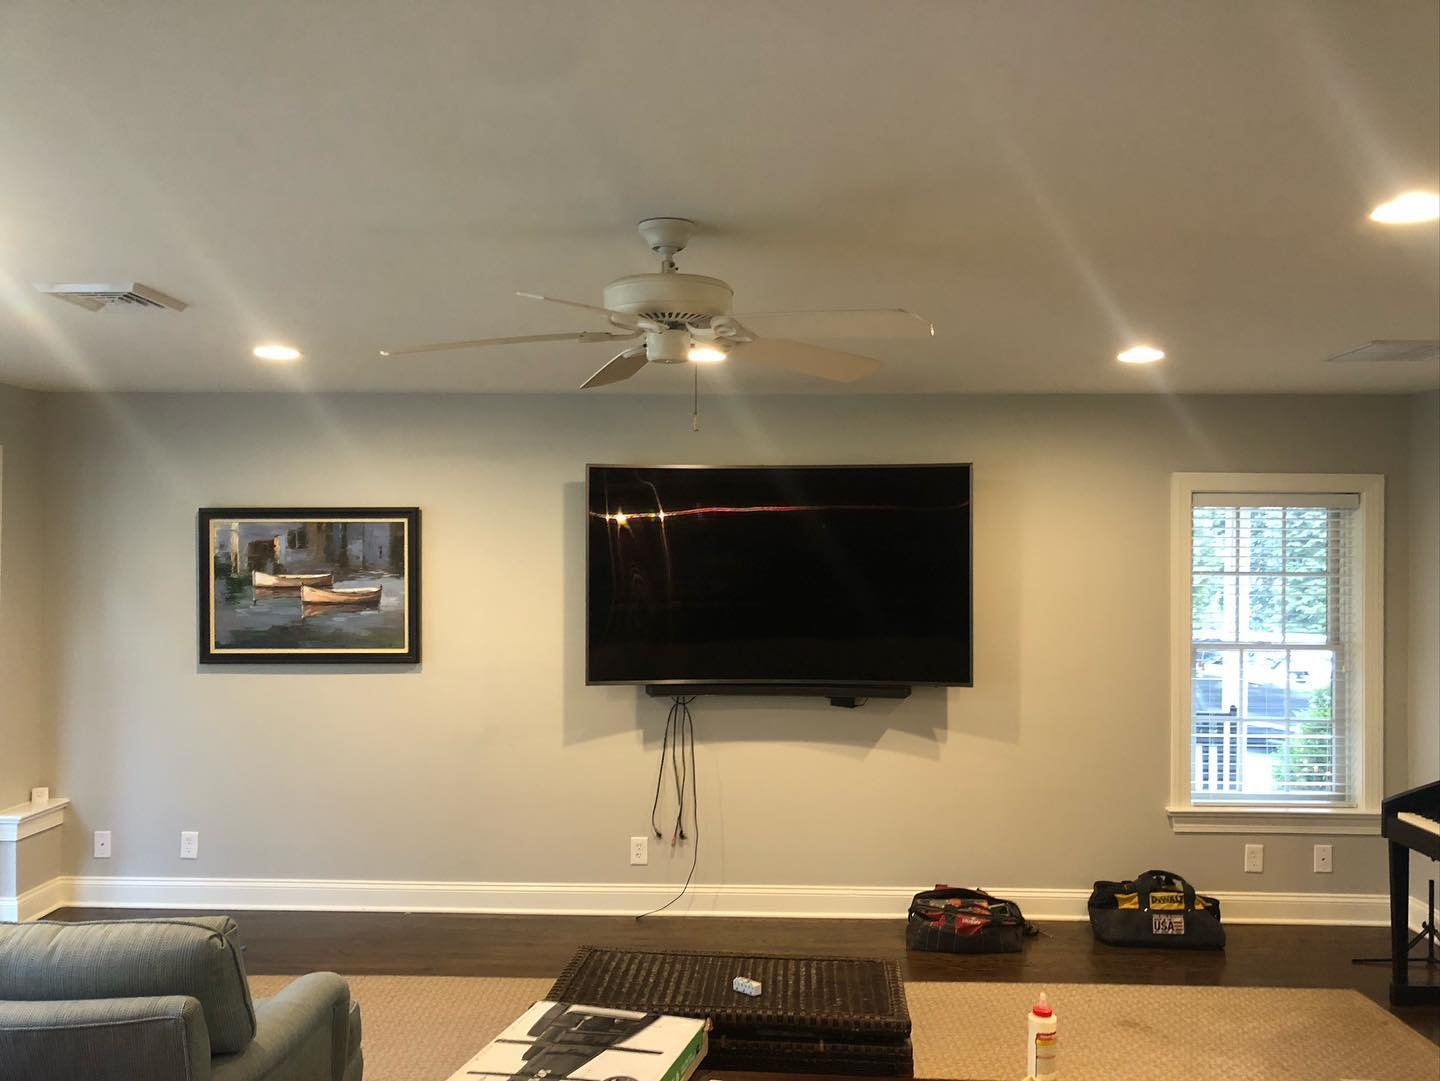  Often times when creating built-ins, I’ll fill an entire wall, but in this case the client wanted to do only a section of their living room wall to act as a focal point, while providing a nice spot for their TV and additional storage.  